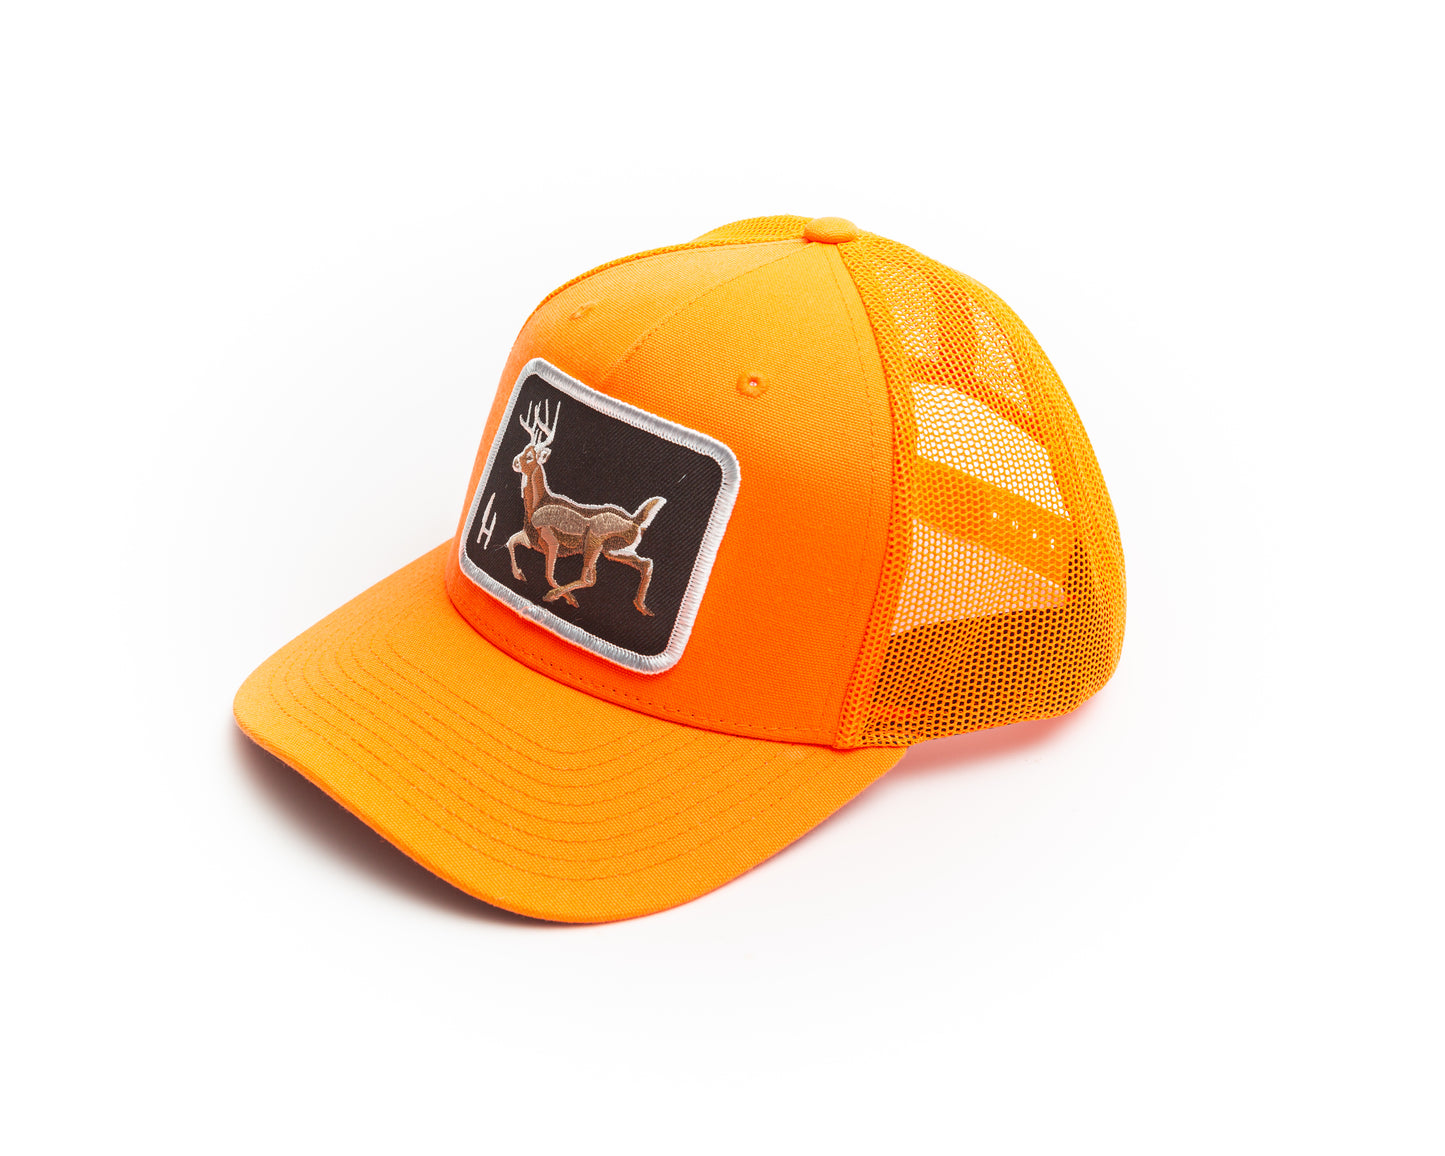 Safety Orange mesh backed trucker cap. baseball hat.  snap back.  This blaze orange trucker cap is decorated with an embroidered patch featuring a running whitetail deer buck.  The eight point buck is embroidered on a black twill background and is surrounded by a white merrowed border.  This is the perfect hat to wear in the woods during whitetail deer hunting gun season to keep you safe and visible.